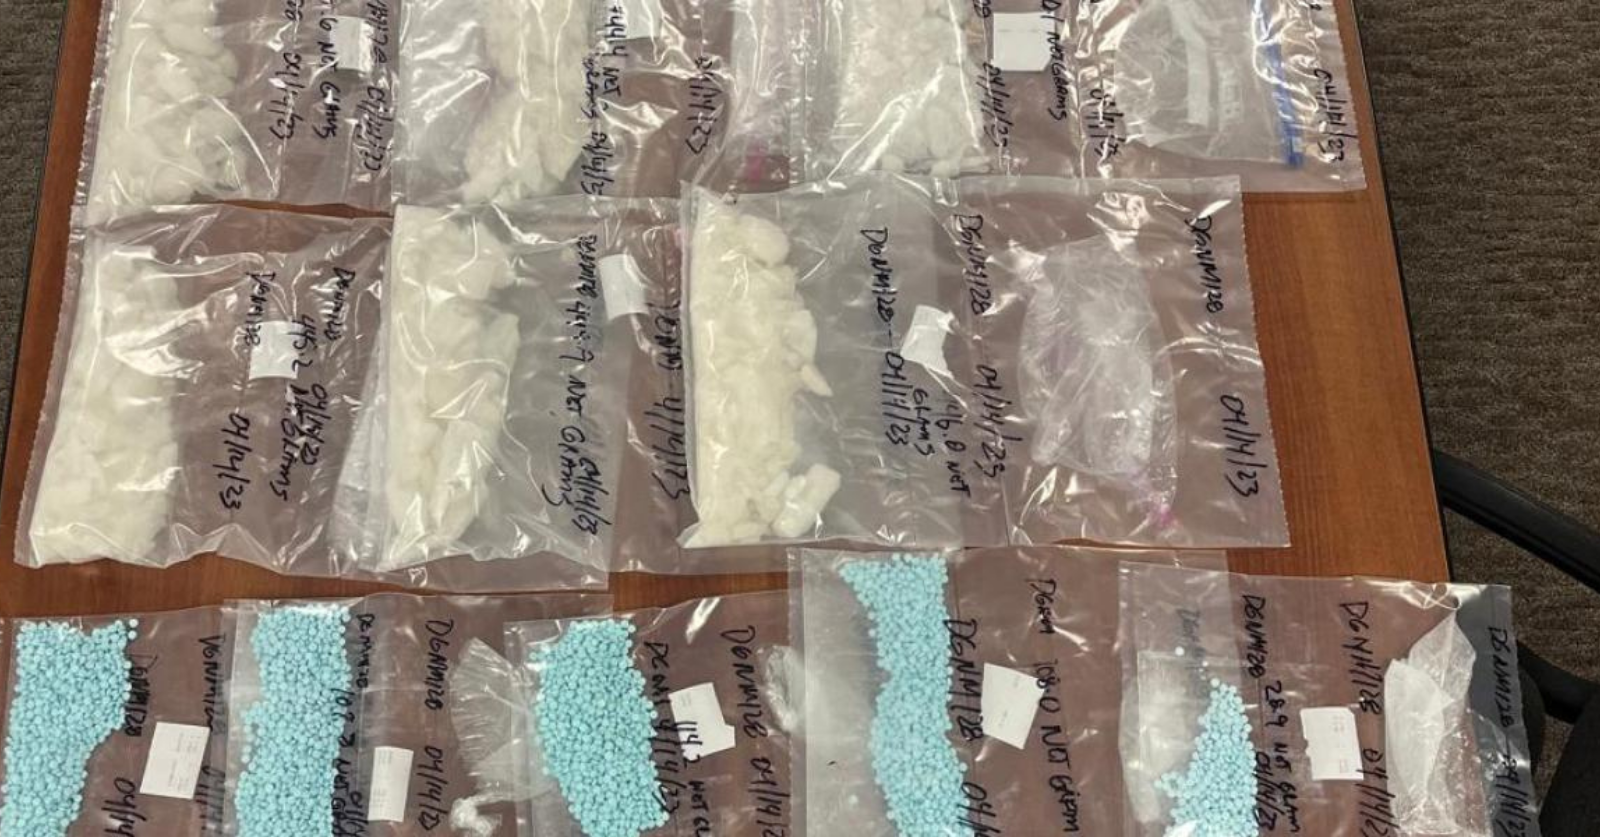 Mexican drug cartel members indicted, accused of trafficking large amounts of fentanyl to Colorado